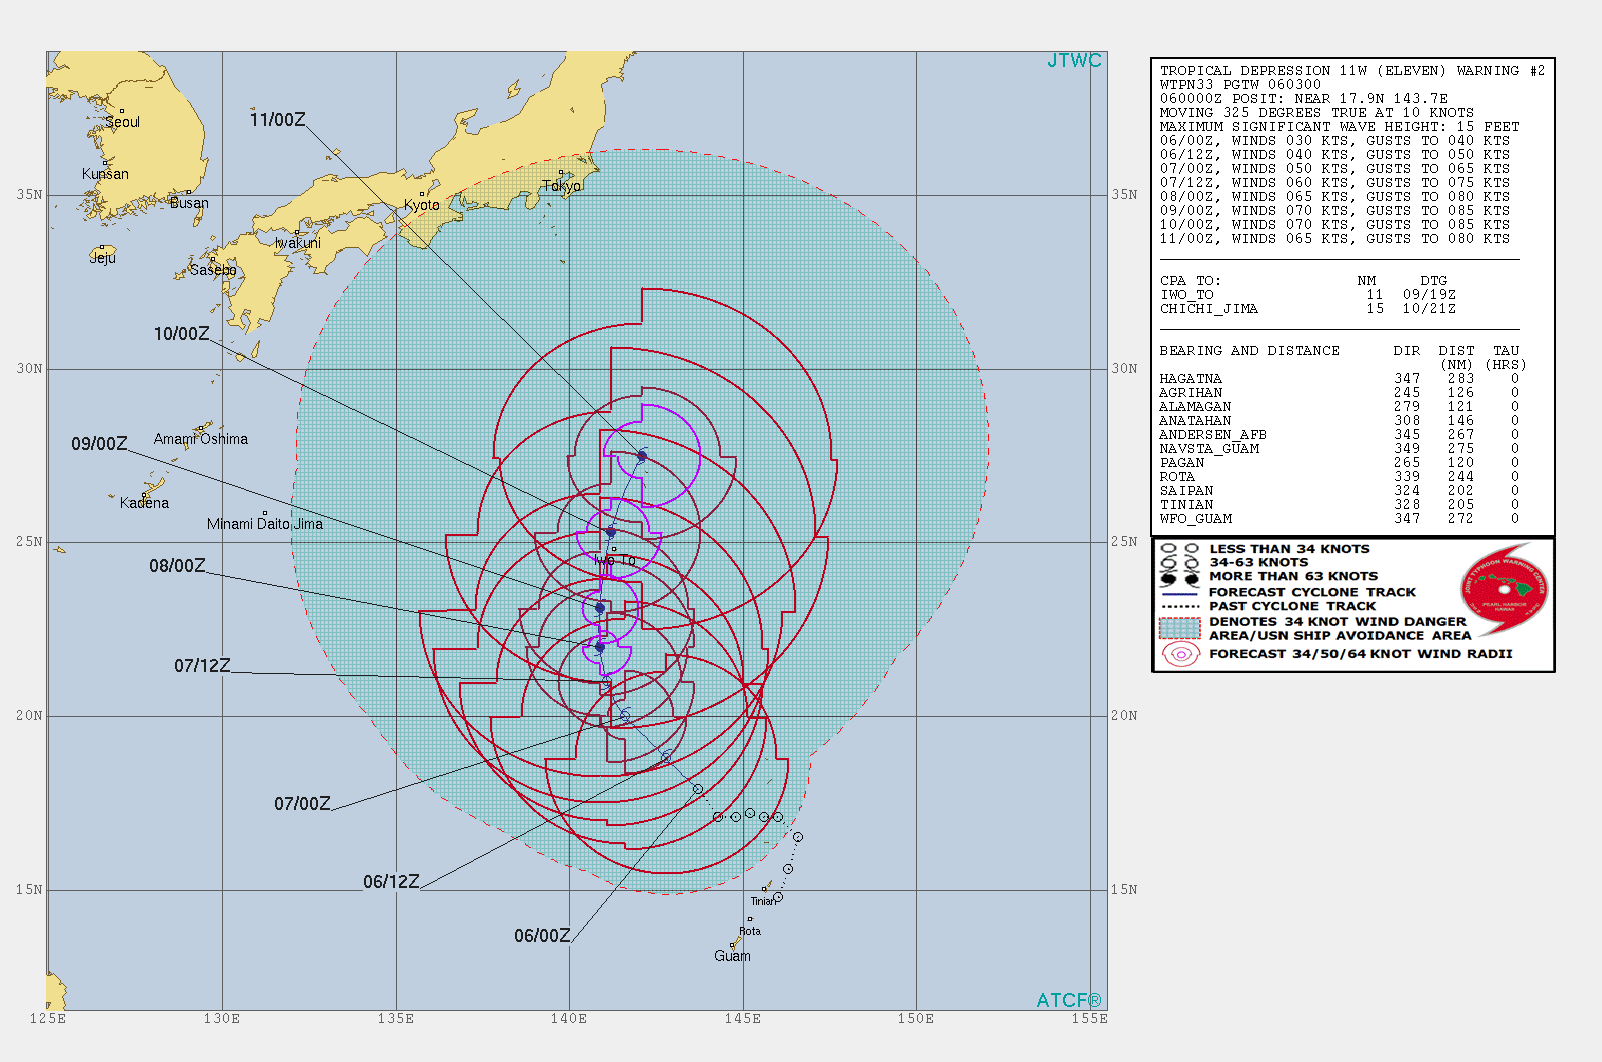 WARNING 2. 11W IS FORECAST TO REACH TYPHOON INTENSITY IN 48H